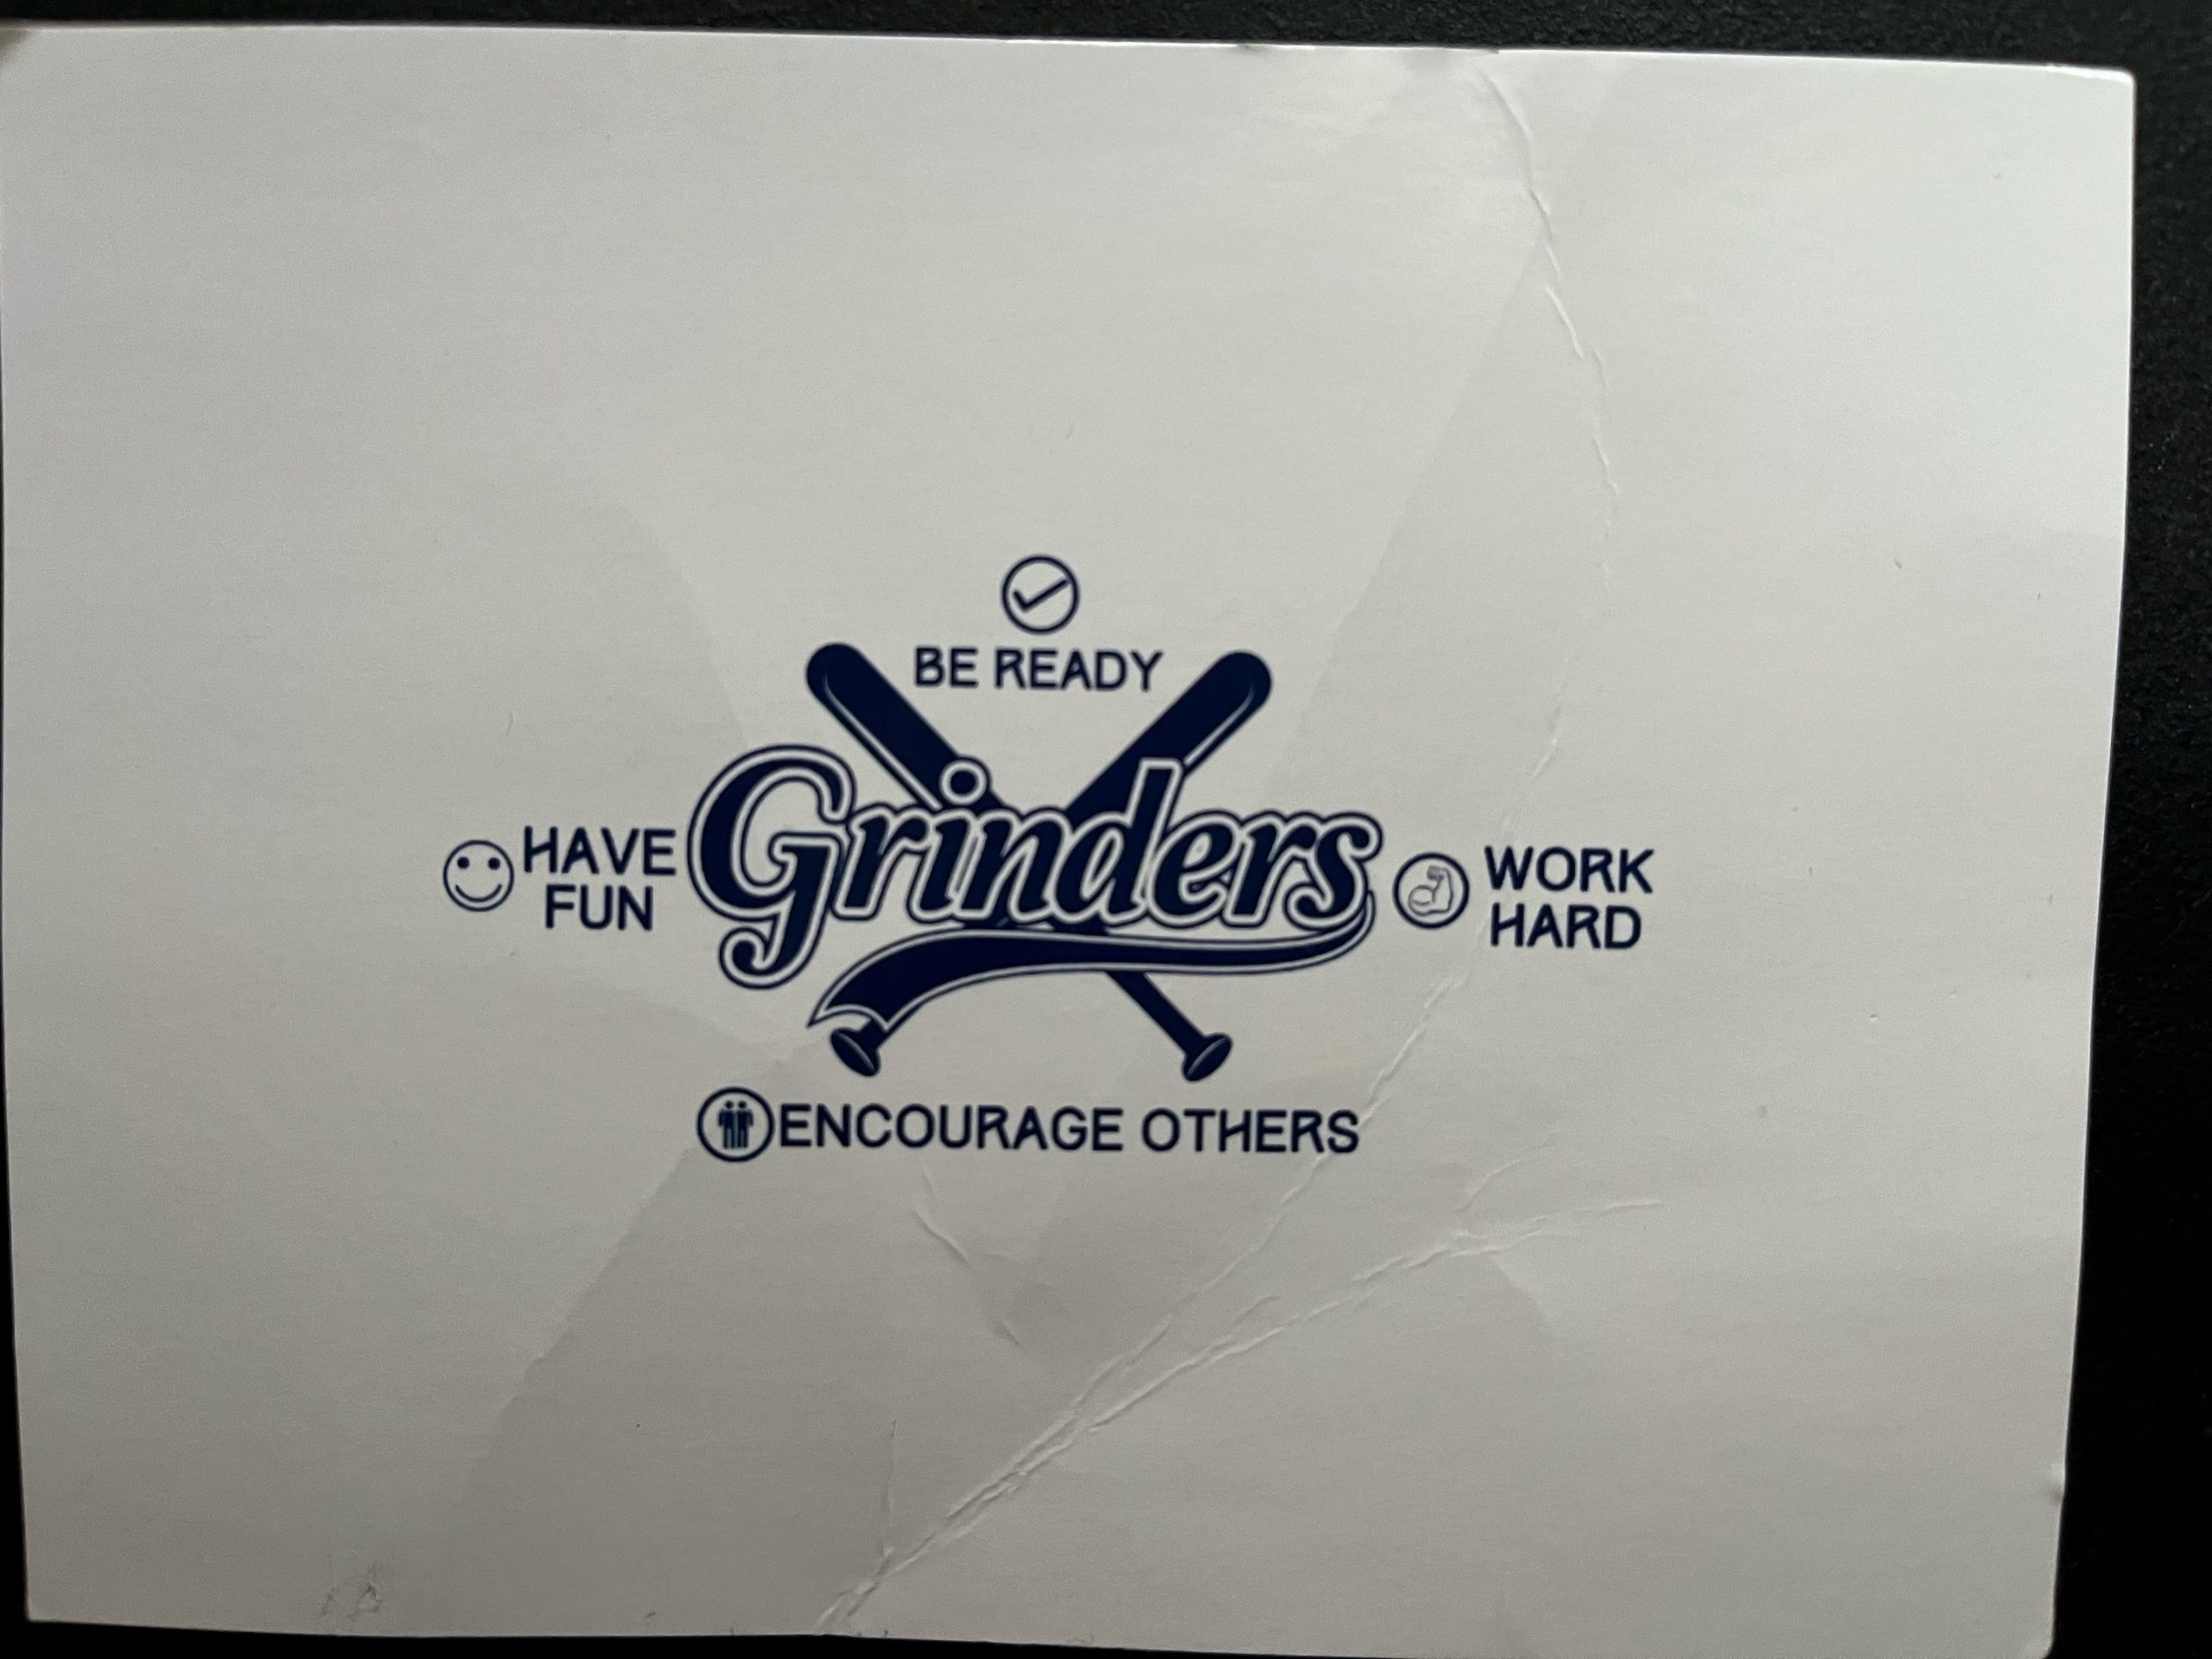 Picture1-Grinders-and-Core-Values